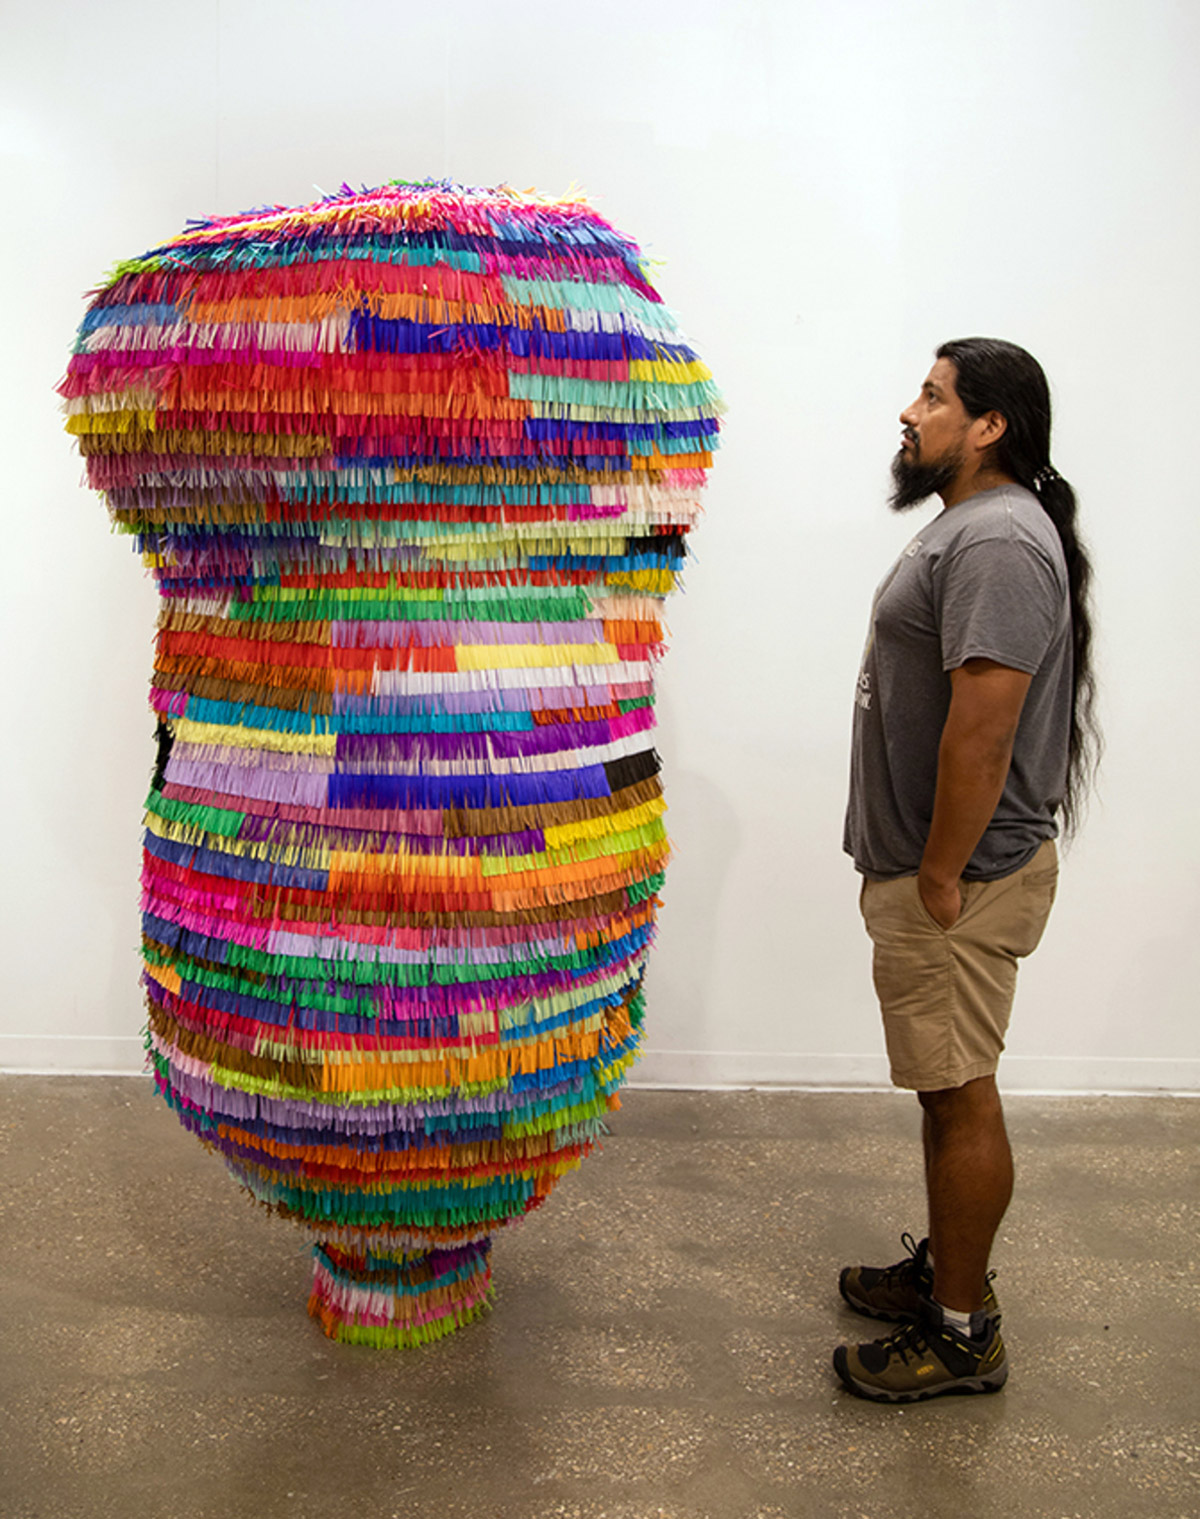 Saxon standing next to a tall sculpture covered in colorful strips of tissue paper